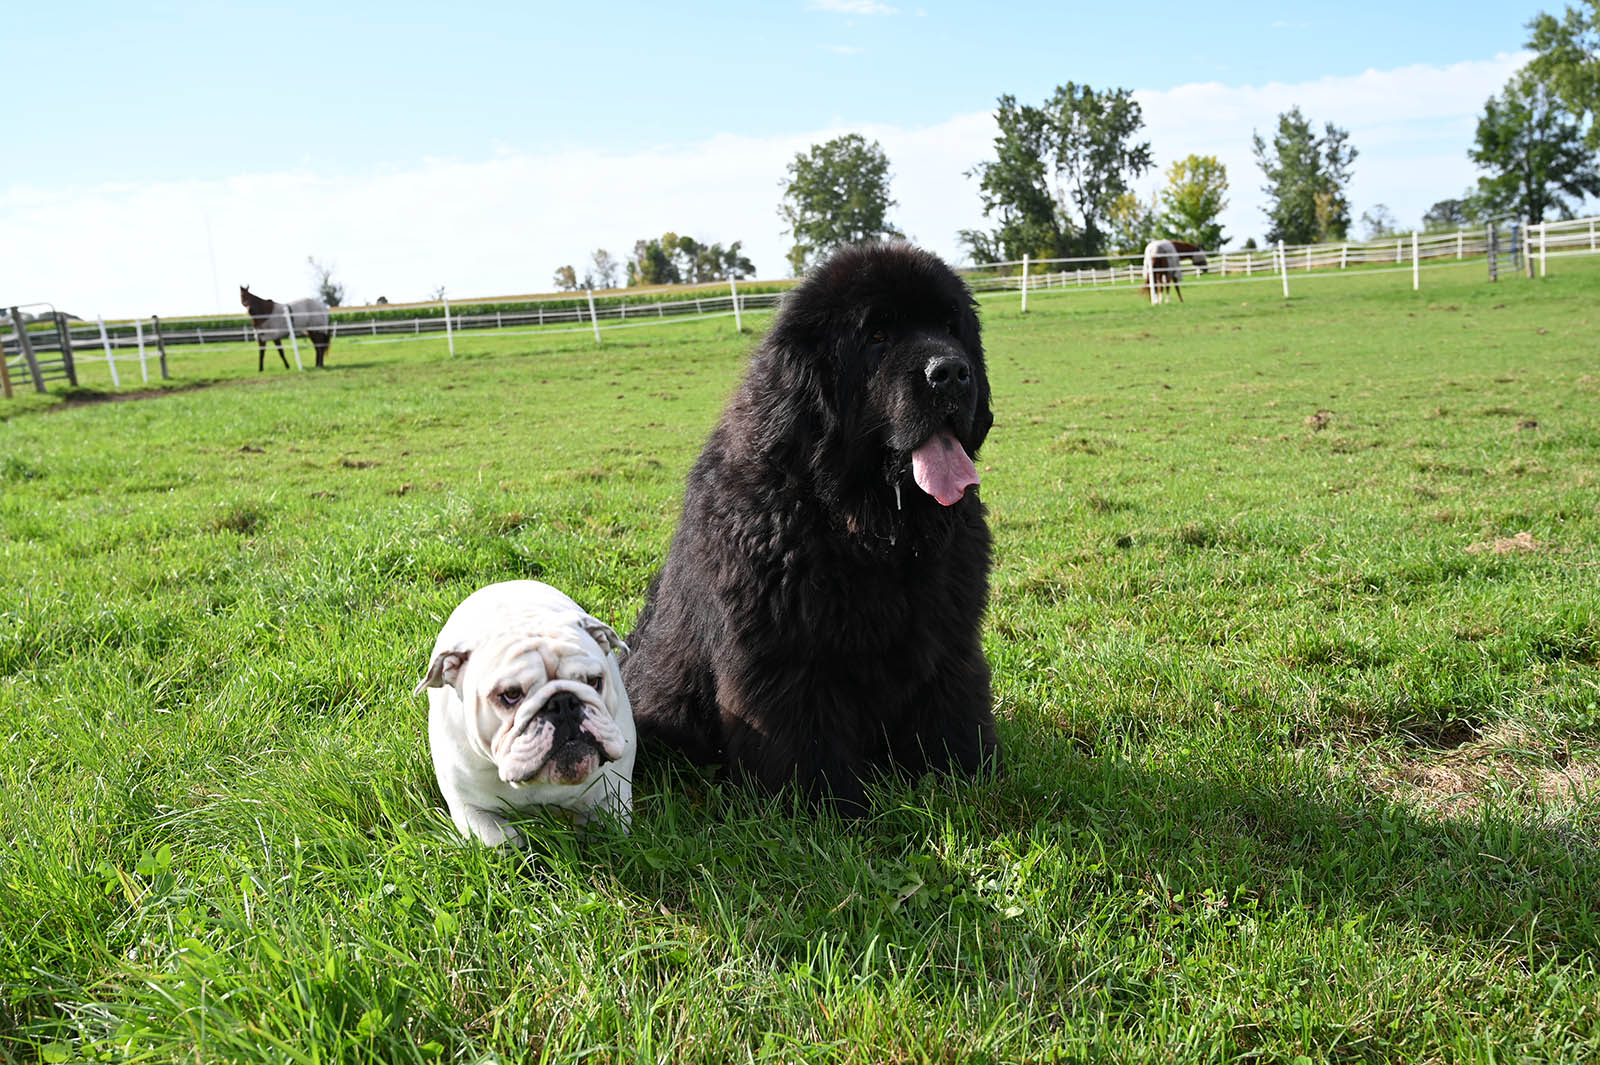 Small white bulldog and black newfoundland dog sitting together in green pasture